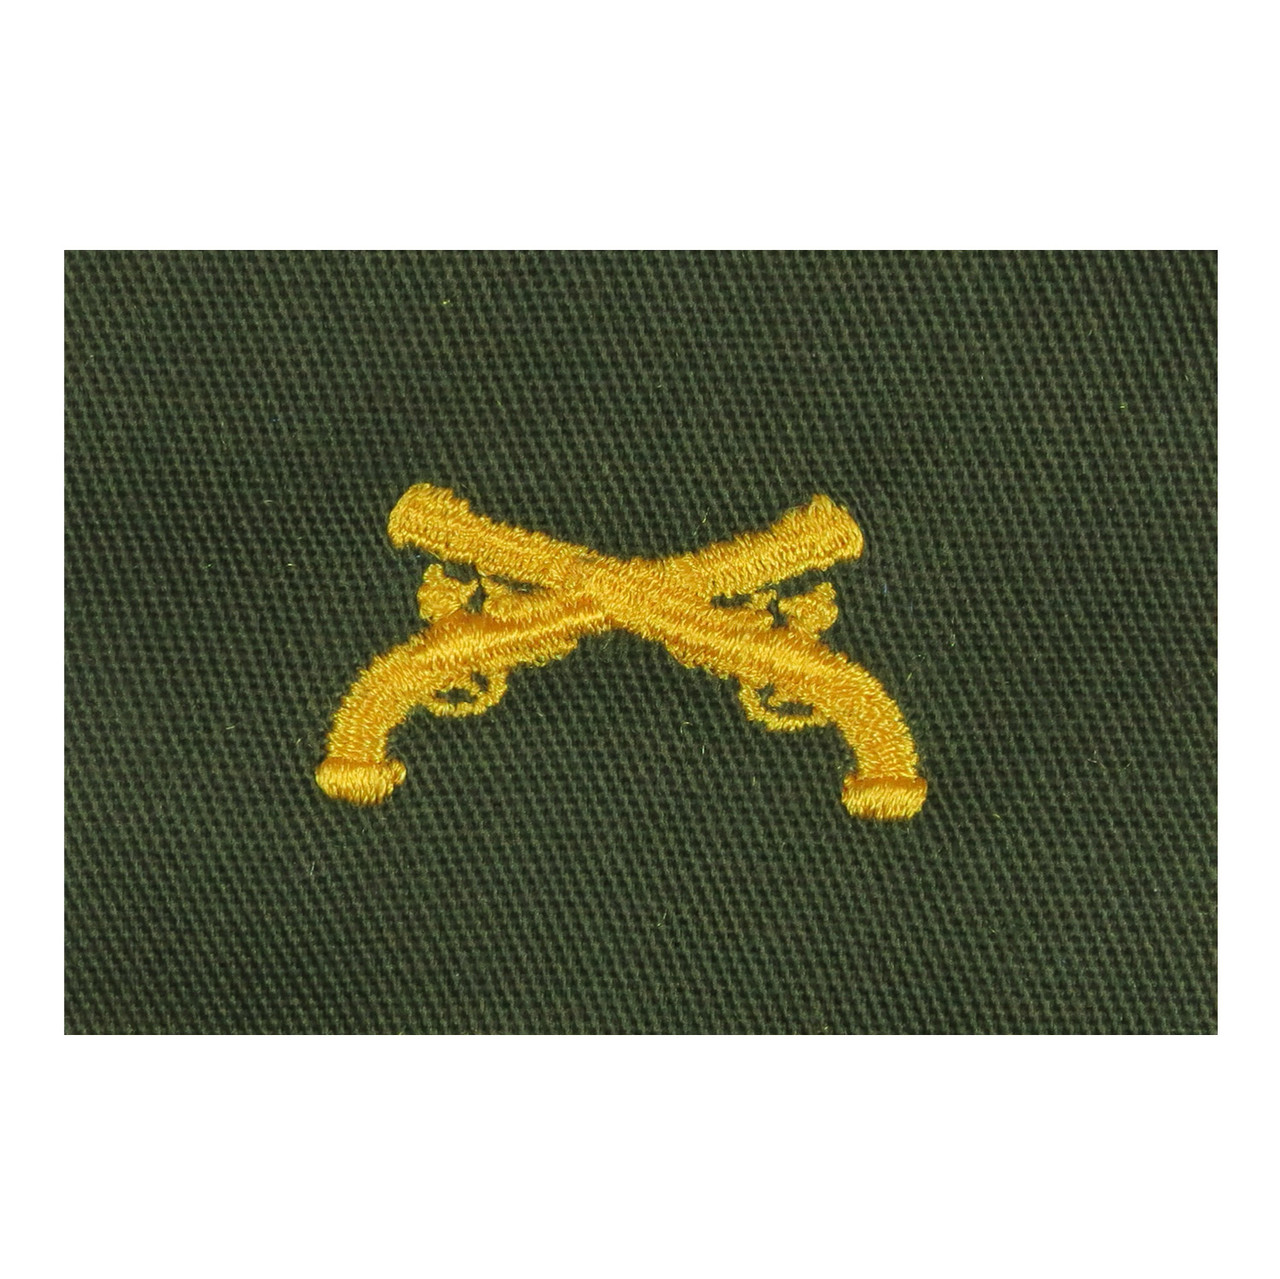 Army Officer Sew-on Branch Insignia - Color MP